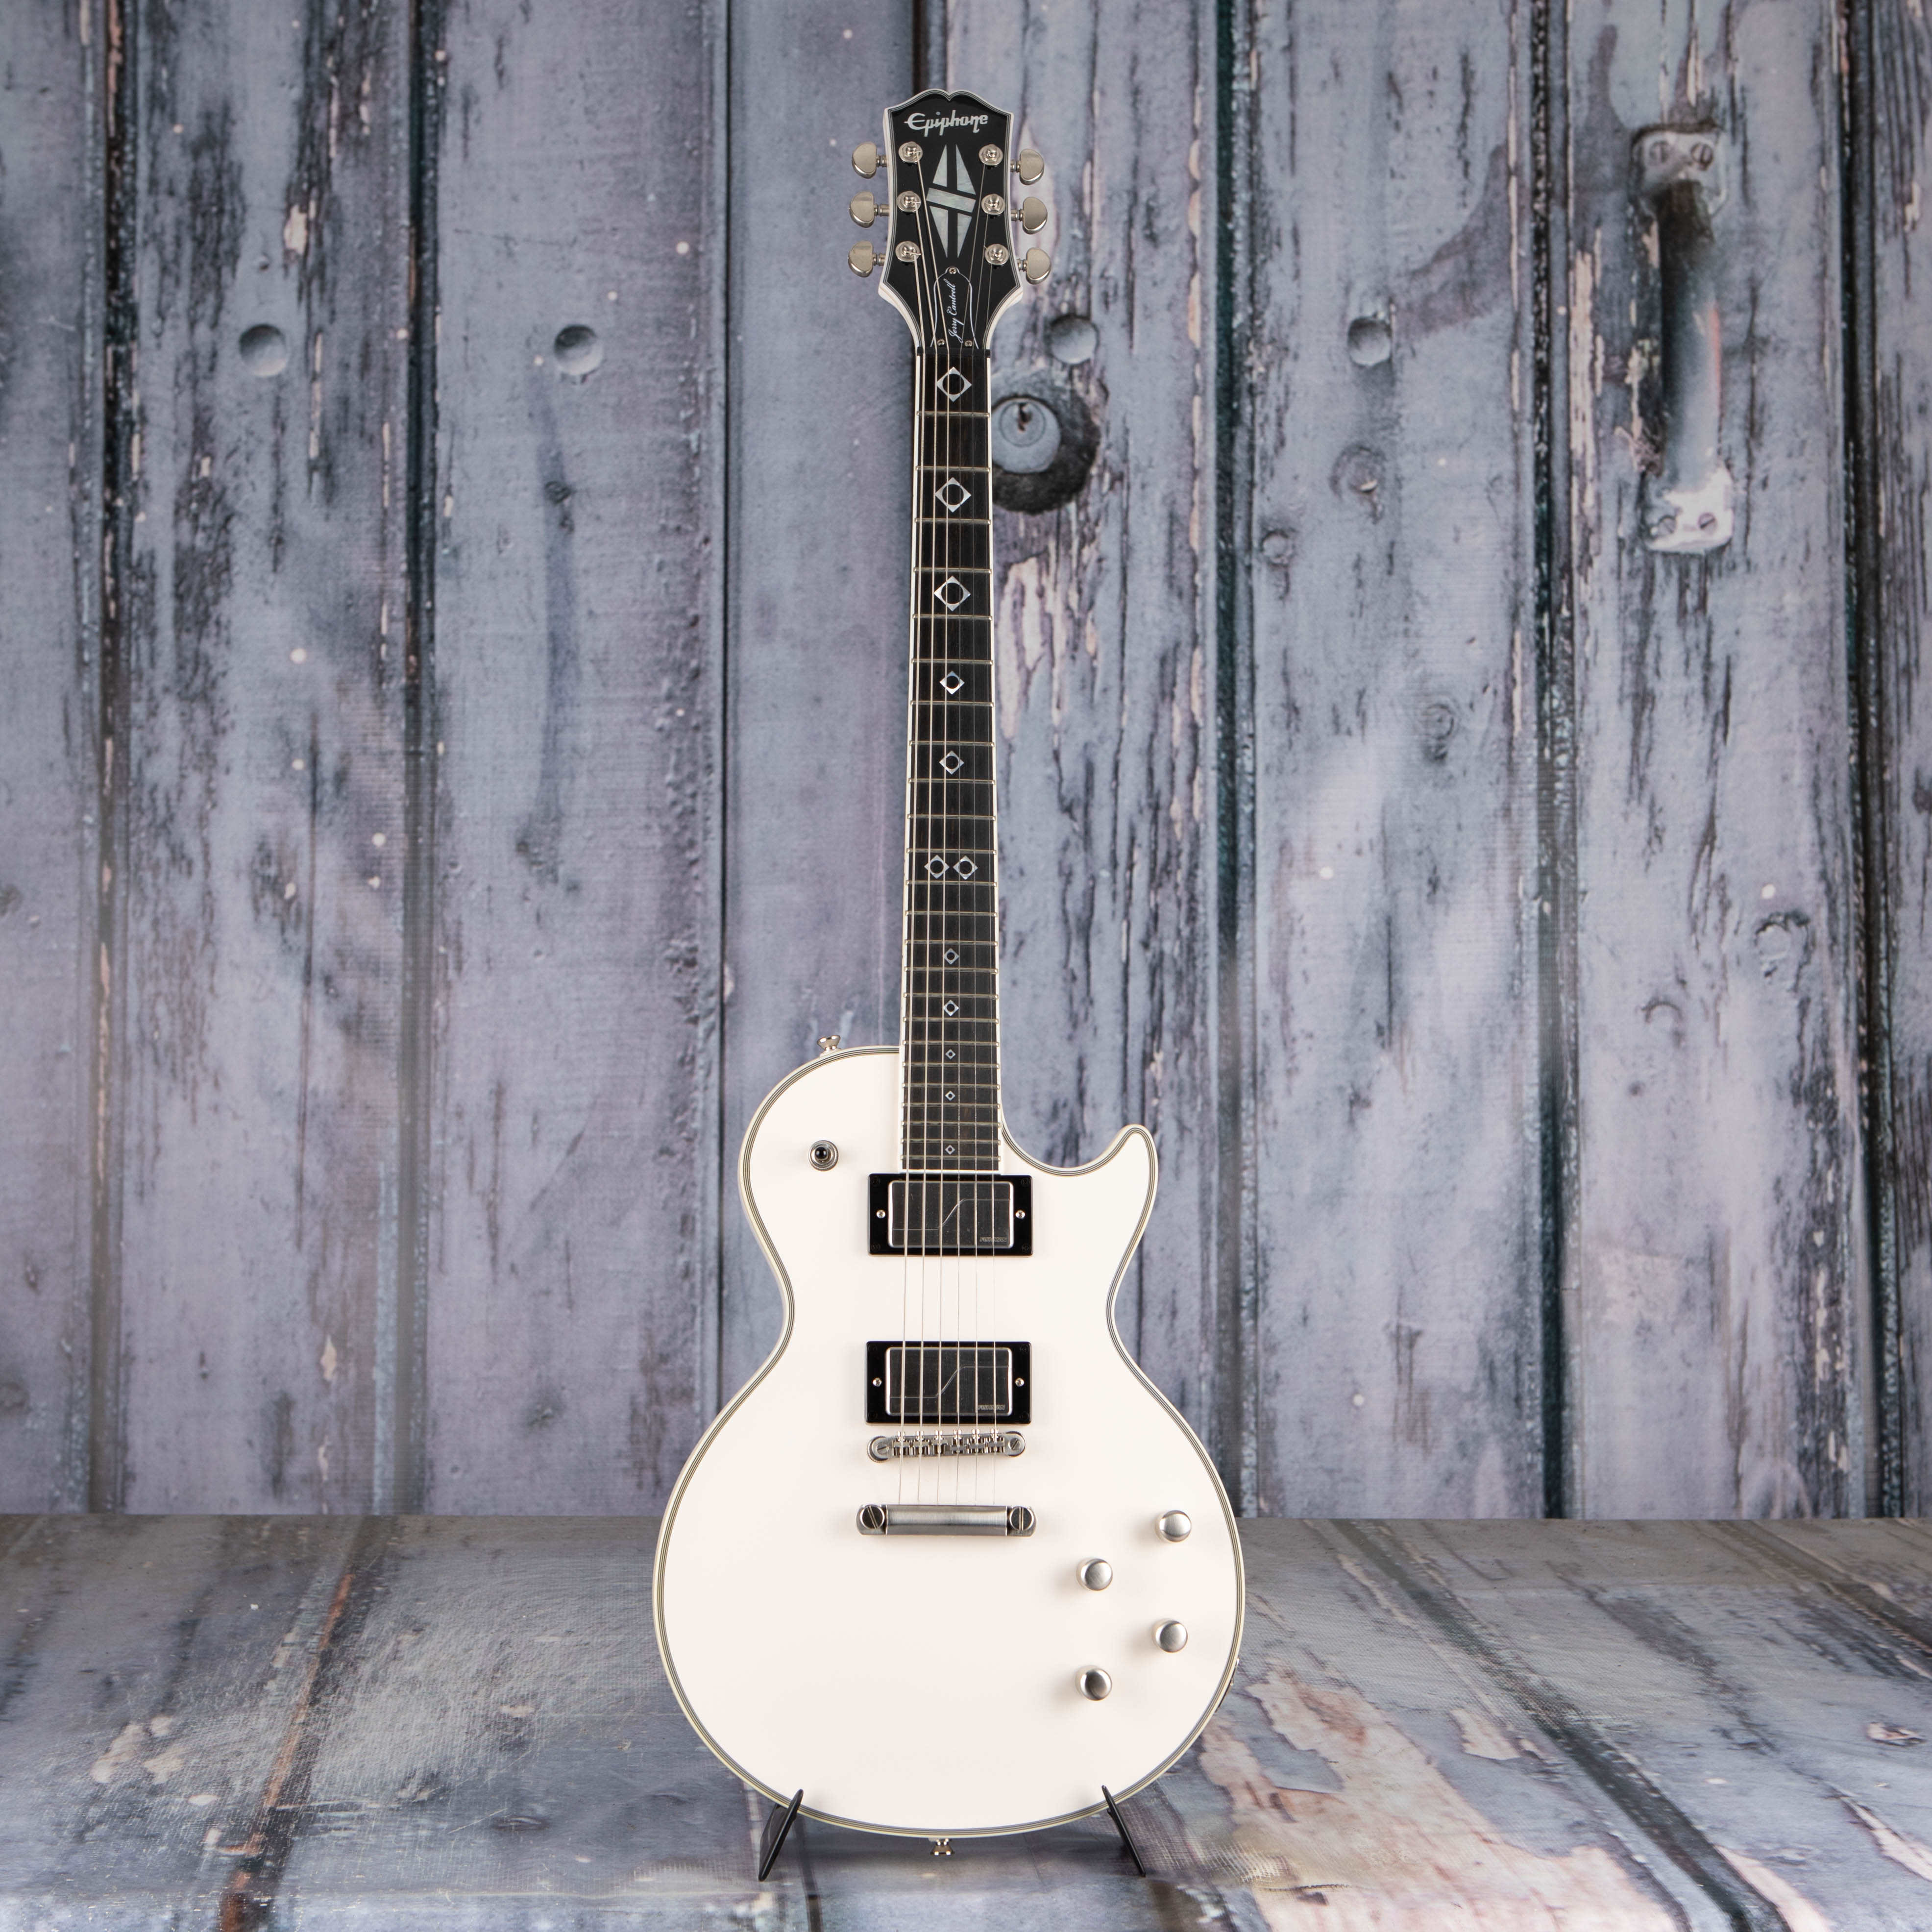 Used Epiphone Jerry Cantrell Prophecy Les Paul Custom Electric Guitar, Bone White, front